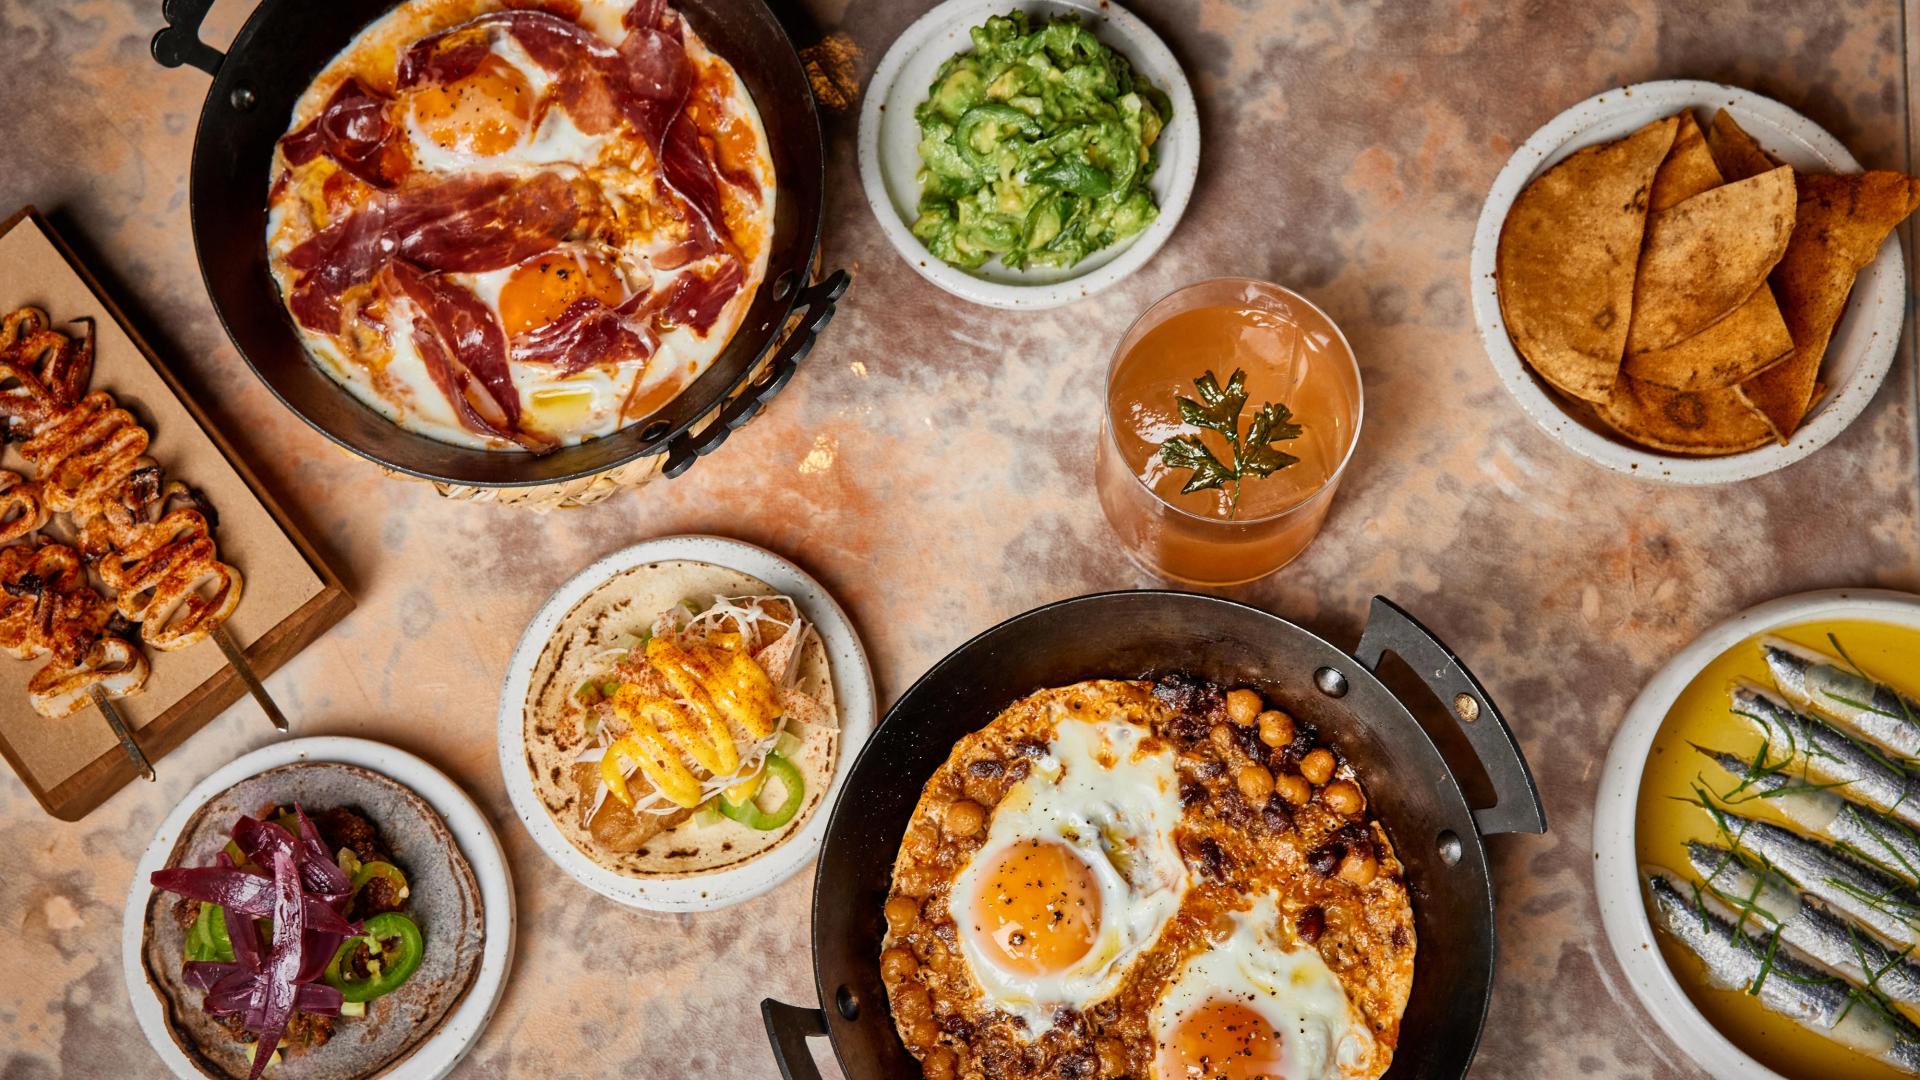 Best brunch London: Decimo serves a Spanish-Mexican inspired brunch in the Seventies-style dining room in The Standard Hotel